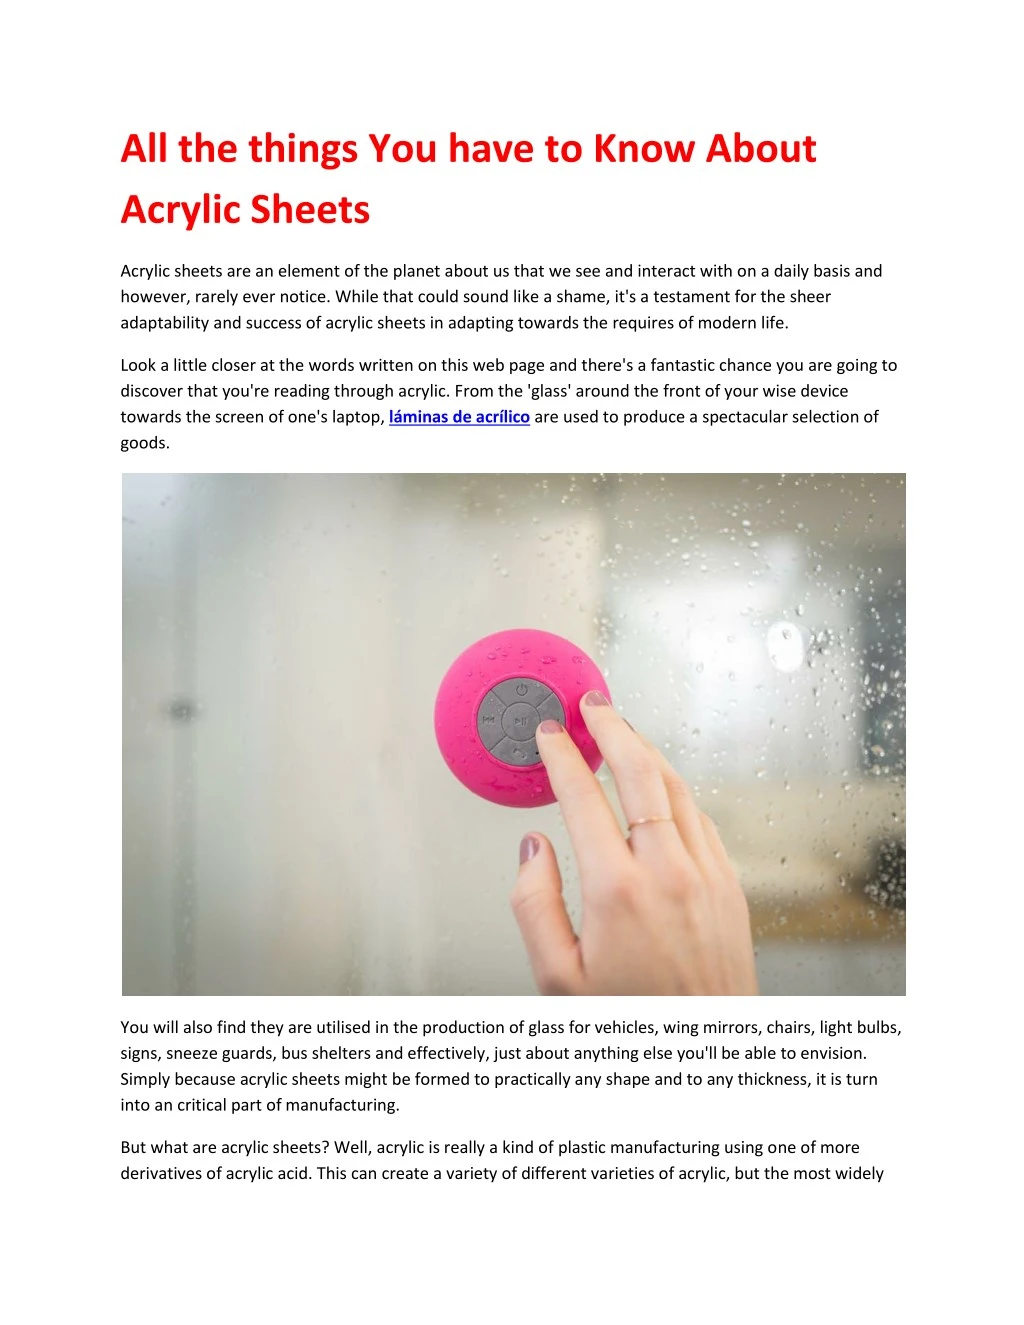 all the things you have to know about acrylic